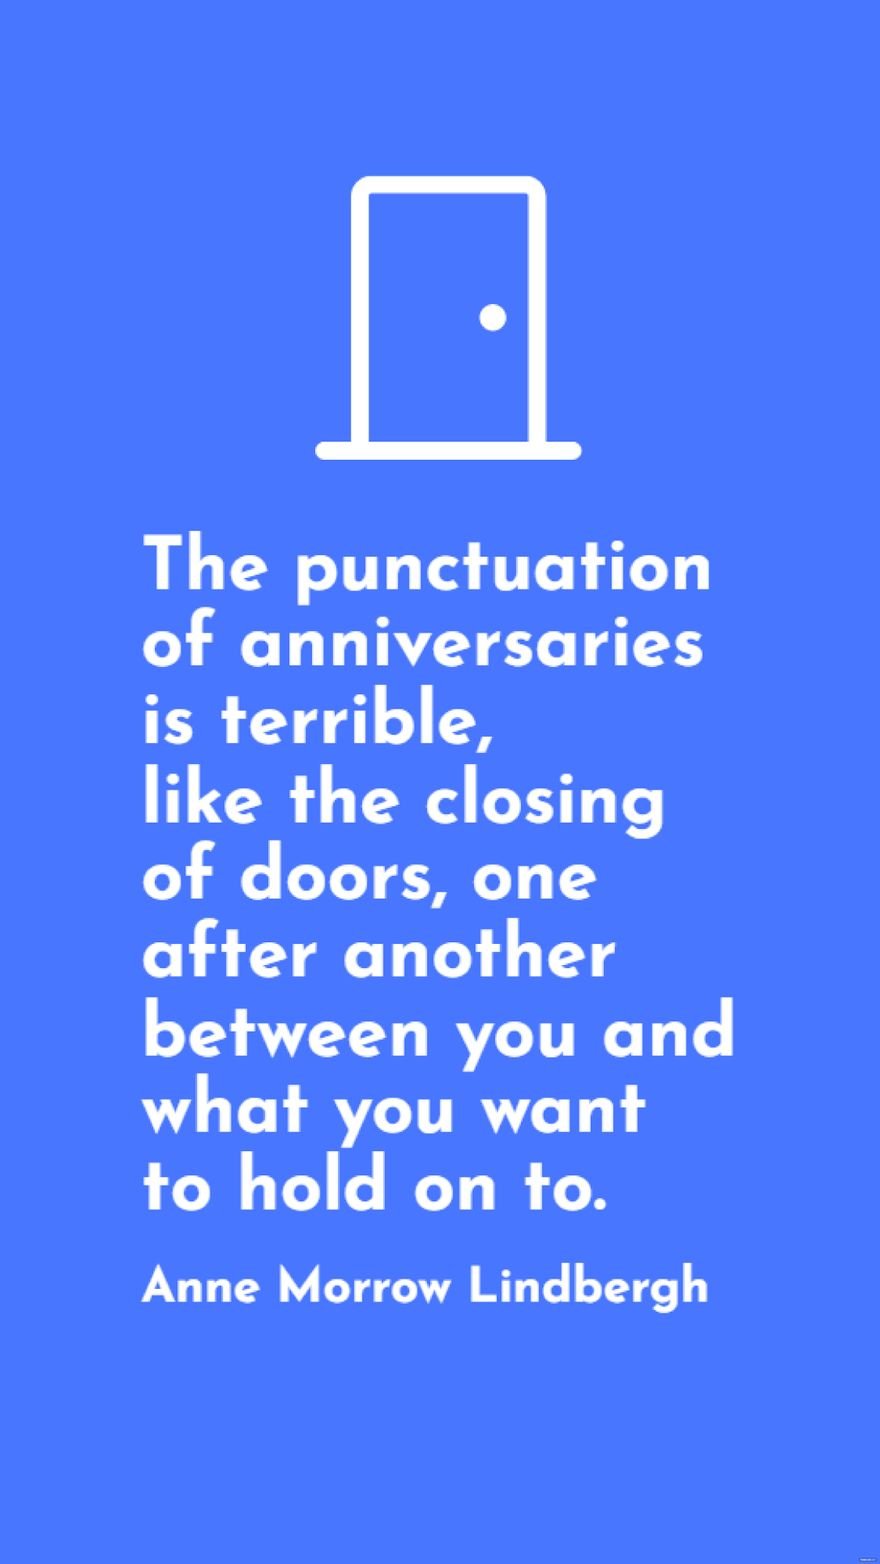 Free Anne Morrow Lindbergh - The punctuation of anniversaries is terrible, like the closing of doors, one after another between you and what you want to hold on to. in JPG